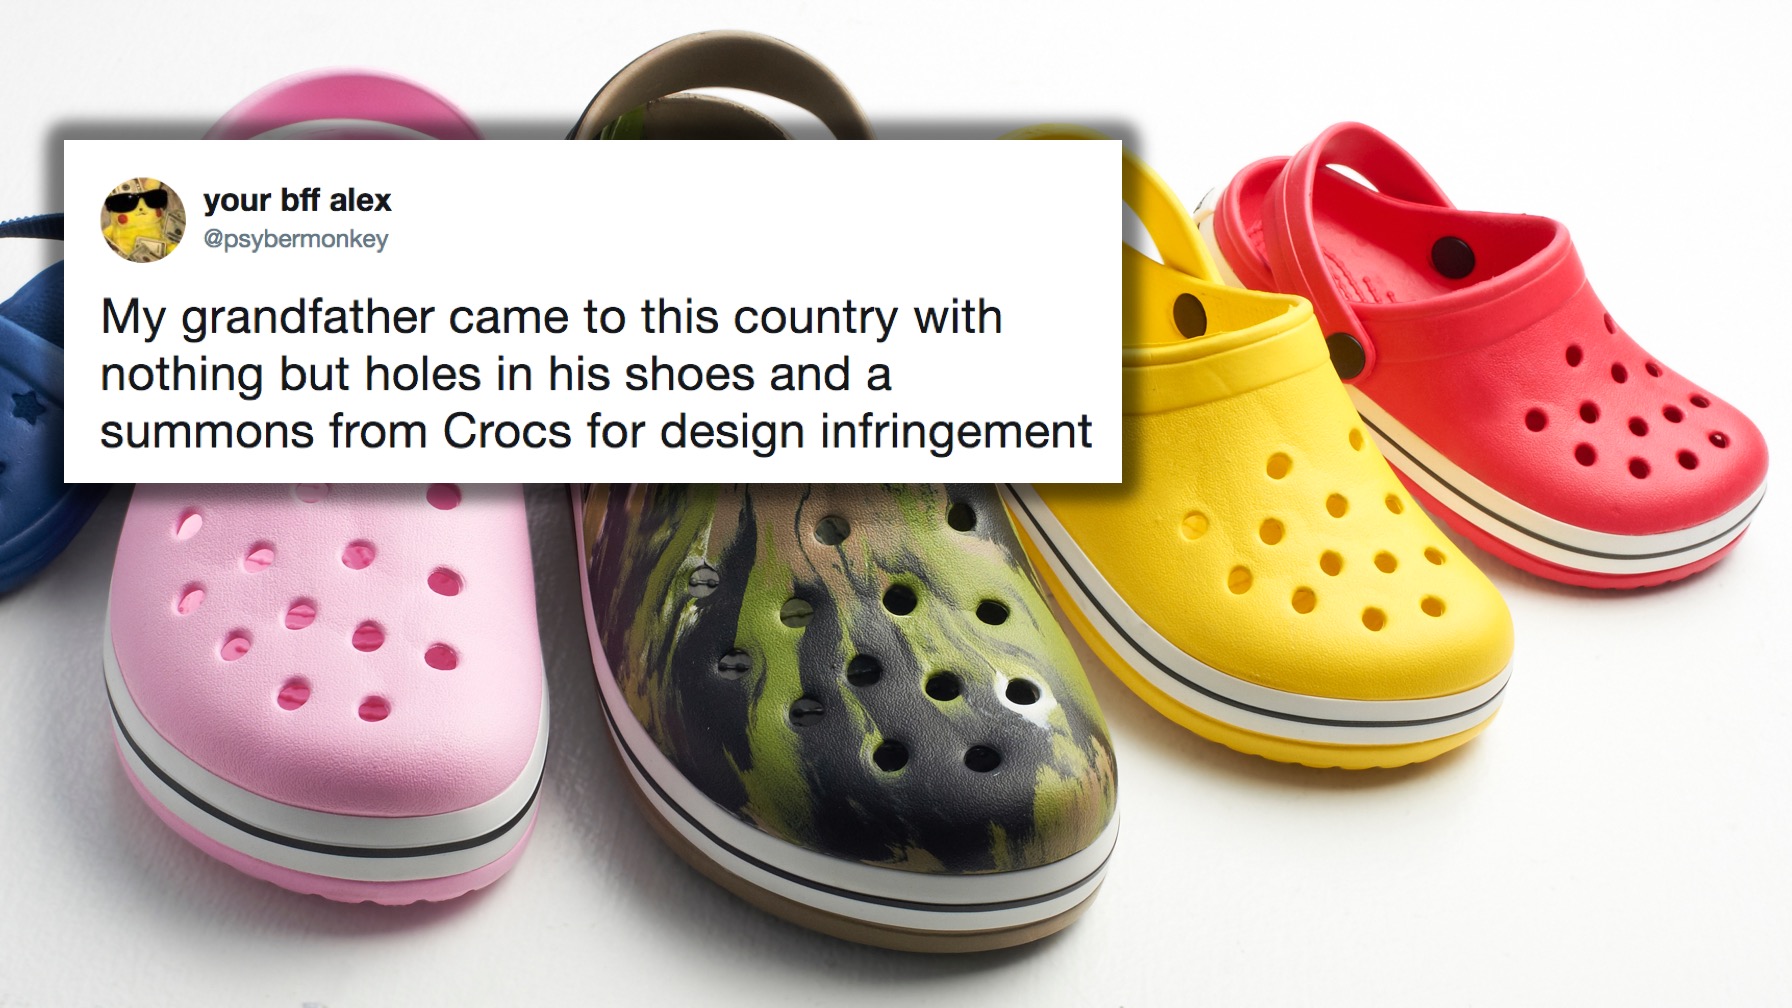 things you put in the holes of crocs